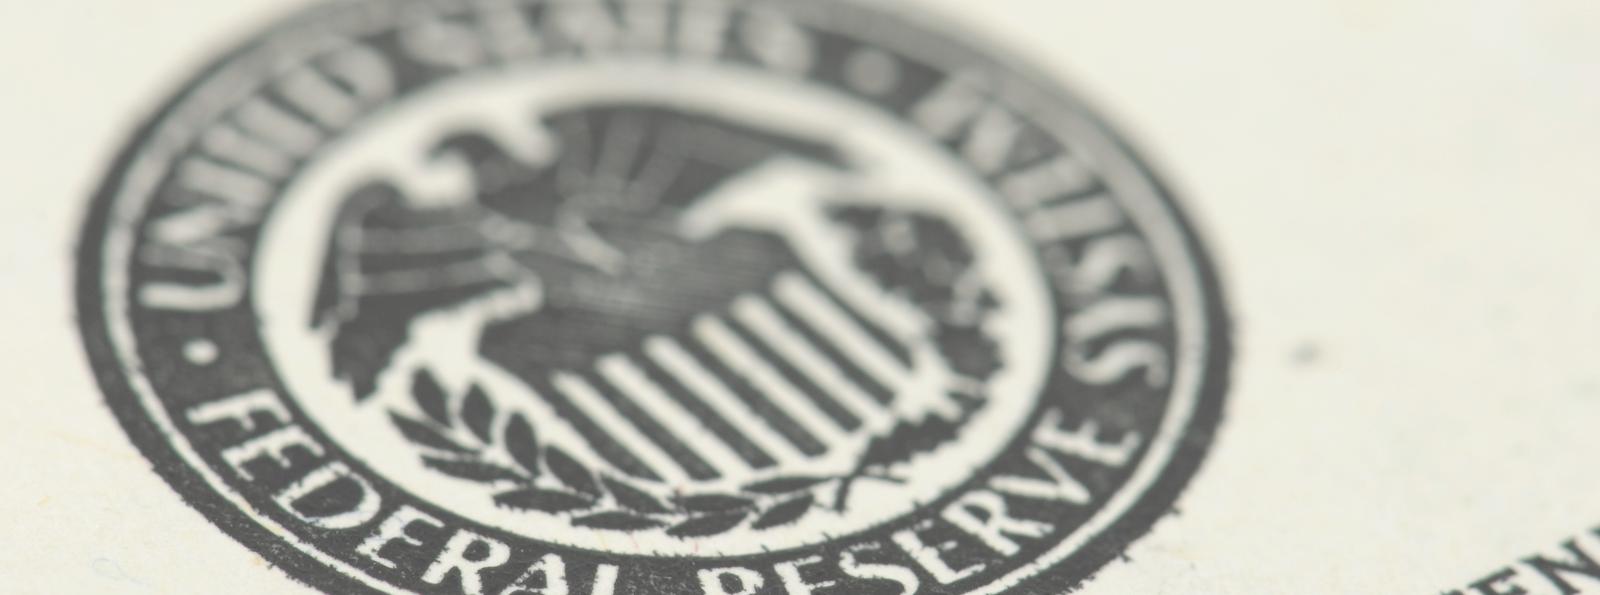 United States Federal Reserve System seal